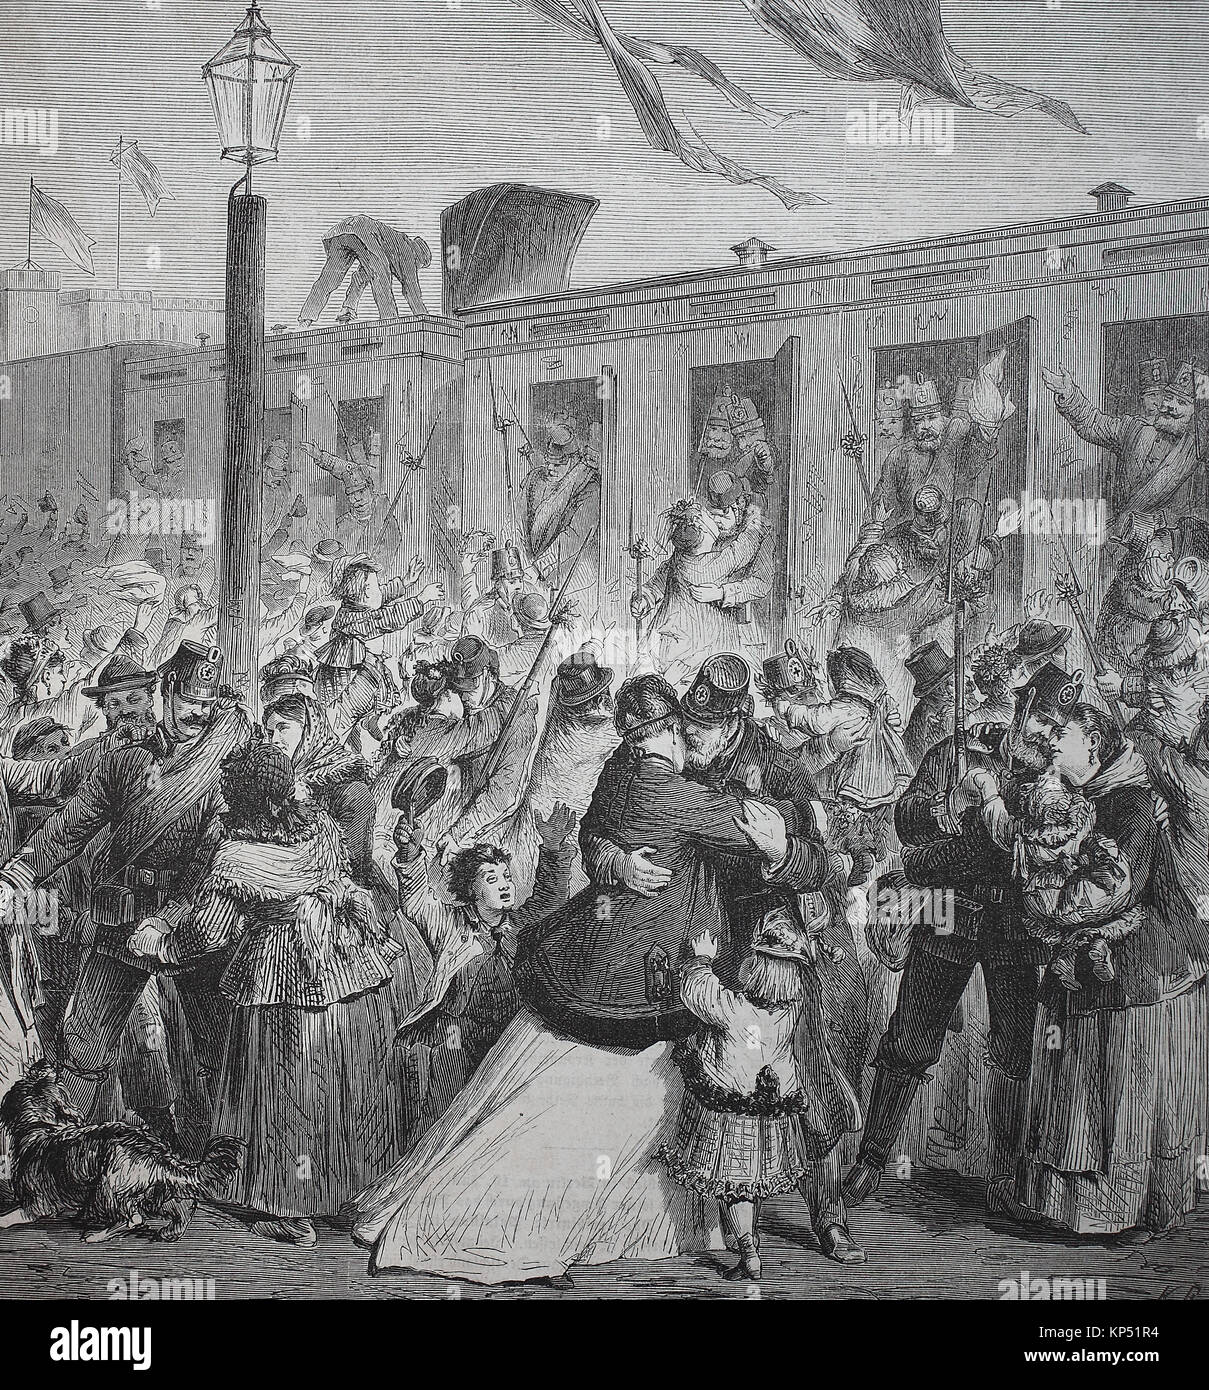 The soldiers of the Guard Landwehr are received by their families at the Potsdam station of Berlin, on March 22, 1871, Germany, time of the Franco-Prussian War or Franco-German War, Deutsch-Franzoesischer Krieg, 1870 - 1871, digital improved reproduction of an original woodcut from 1871 Stock Photo